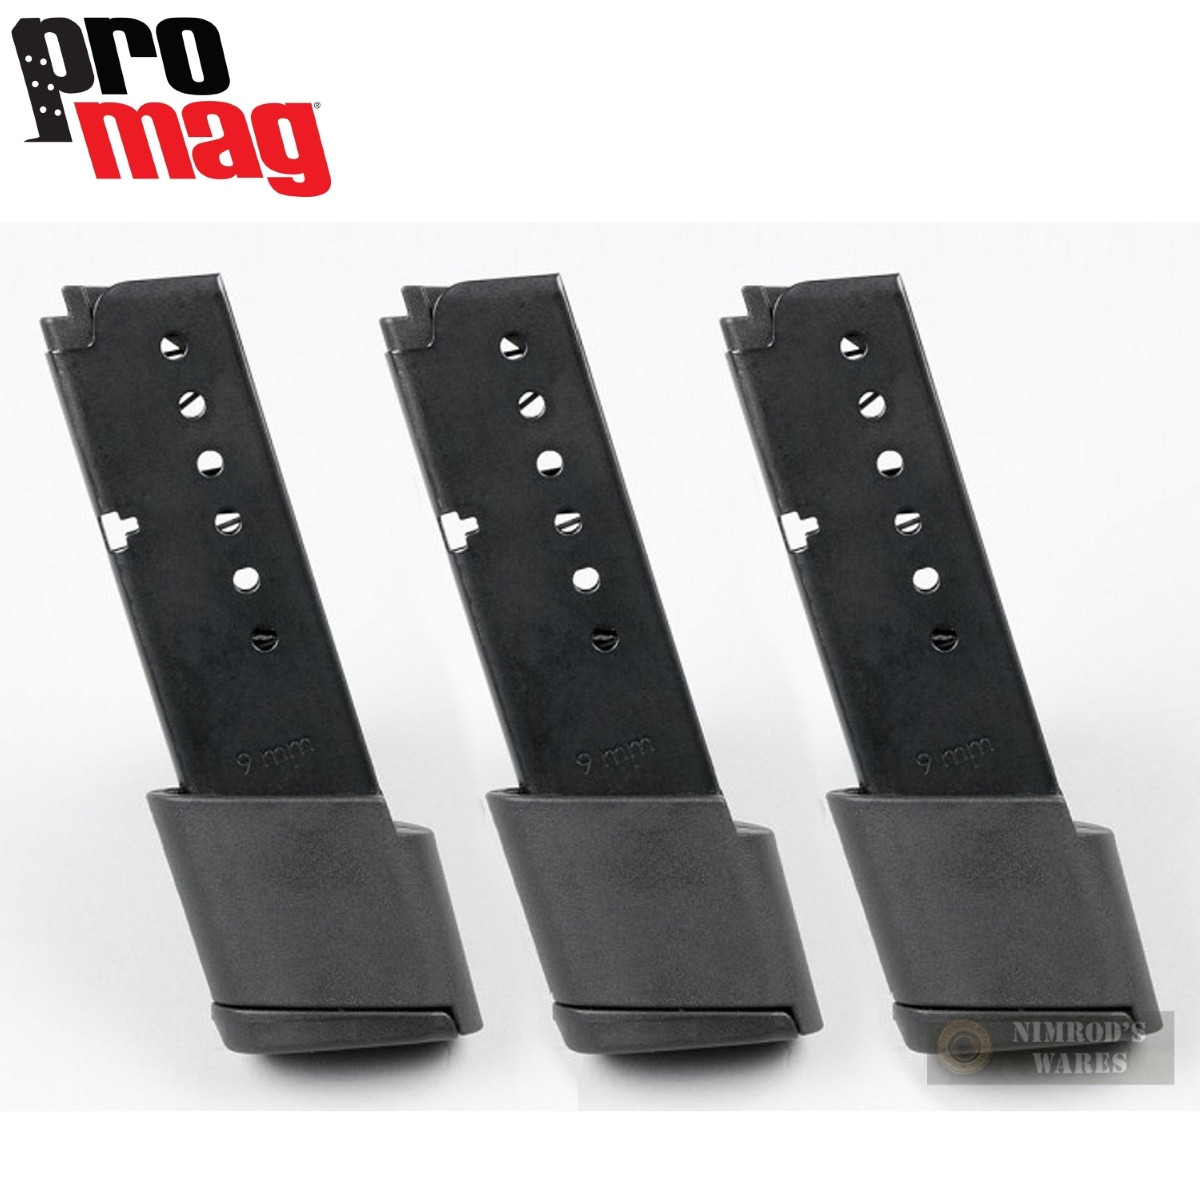 Magazines Mags Clips 9mm Taurus TH-9 Details about   2 Factory NEW 10rd T175 